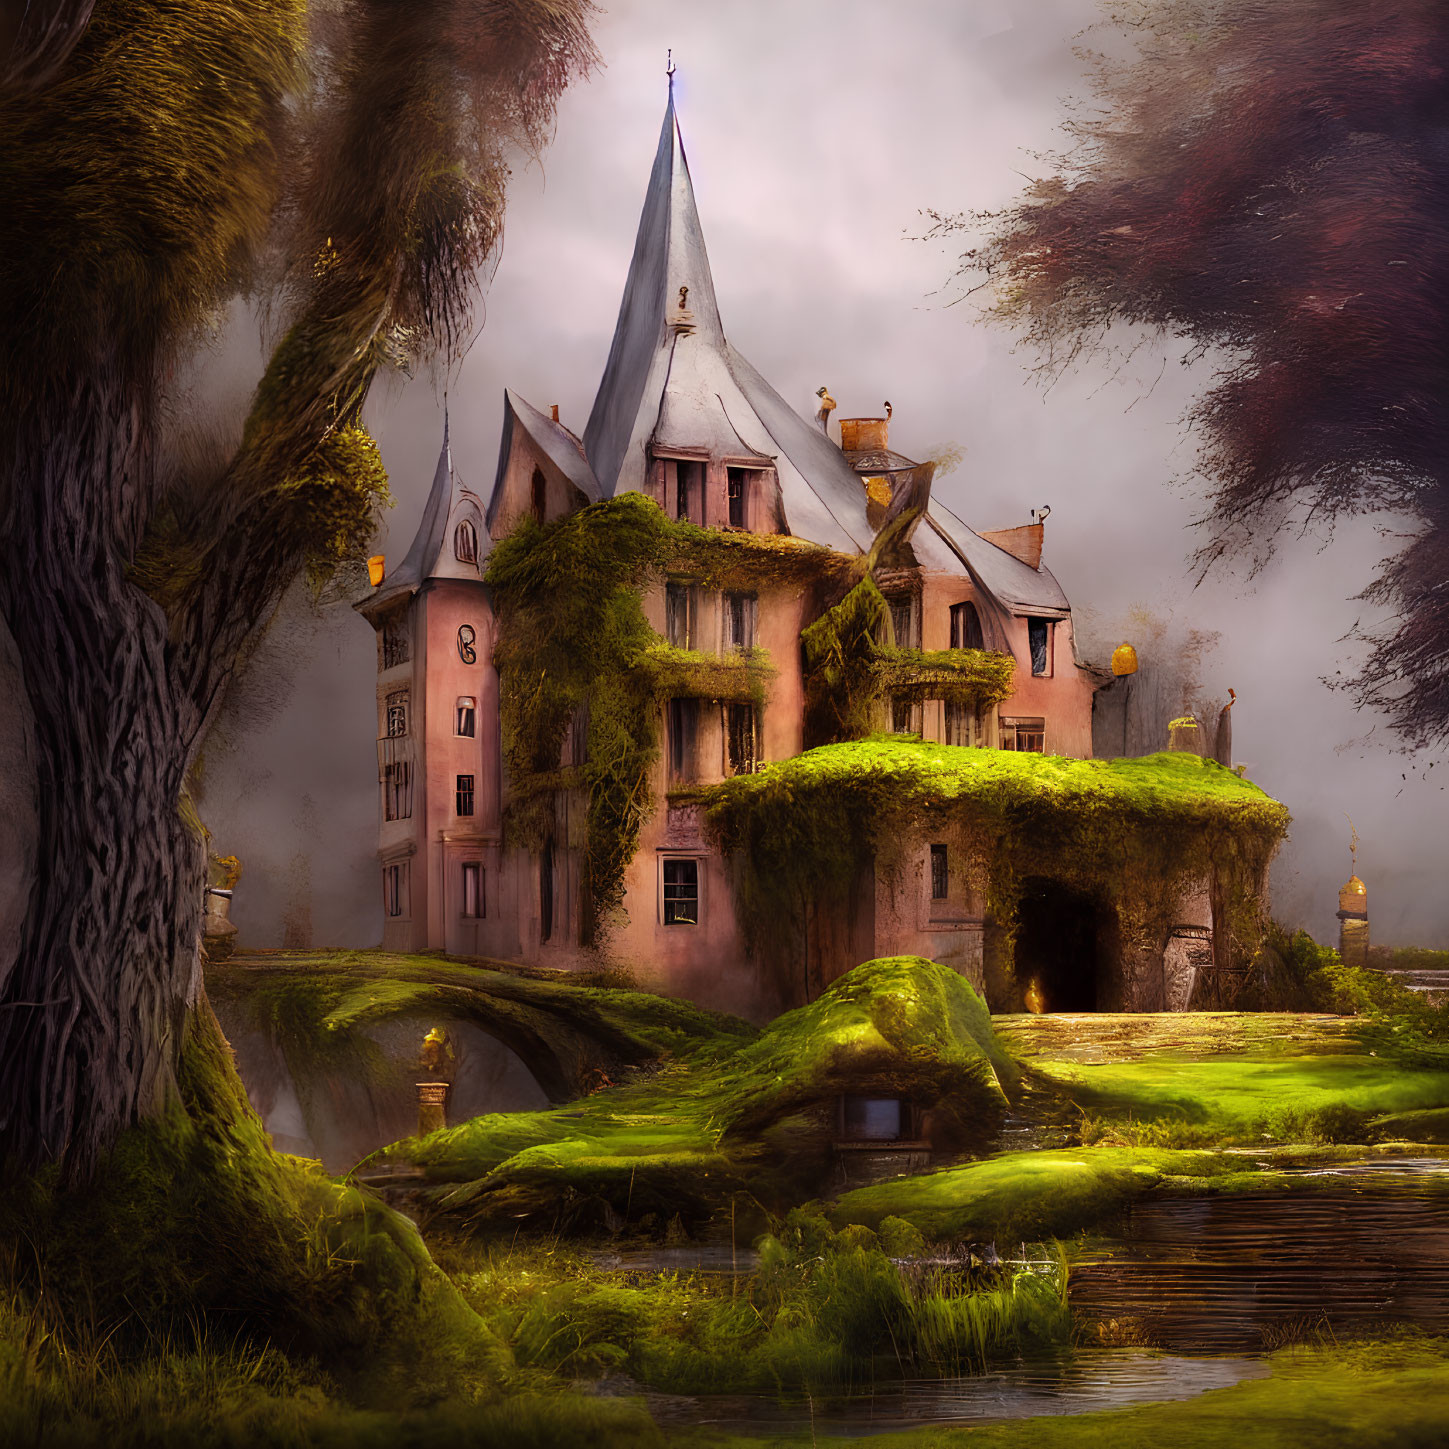 Moss-Covered Fairytale Castle in Enchanted Forest Setting